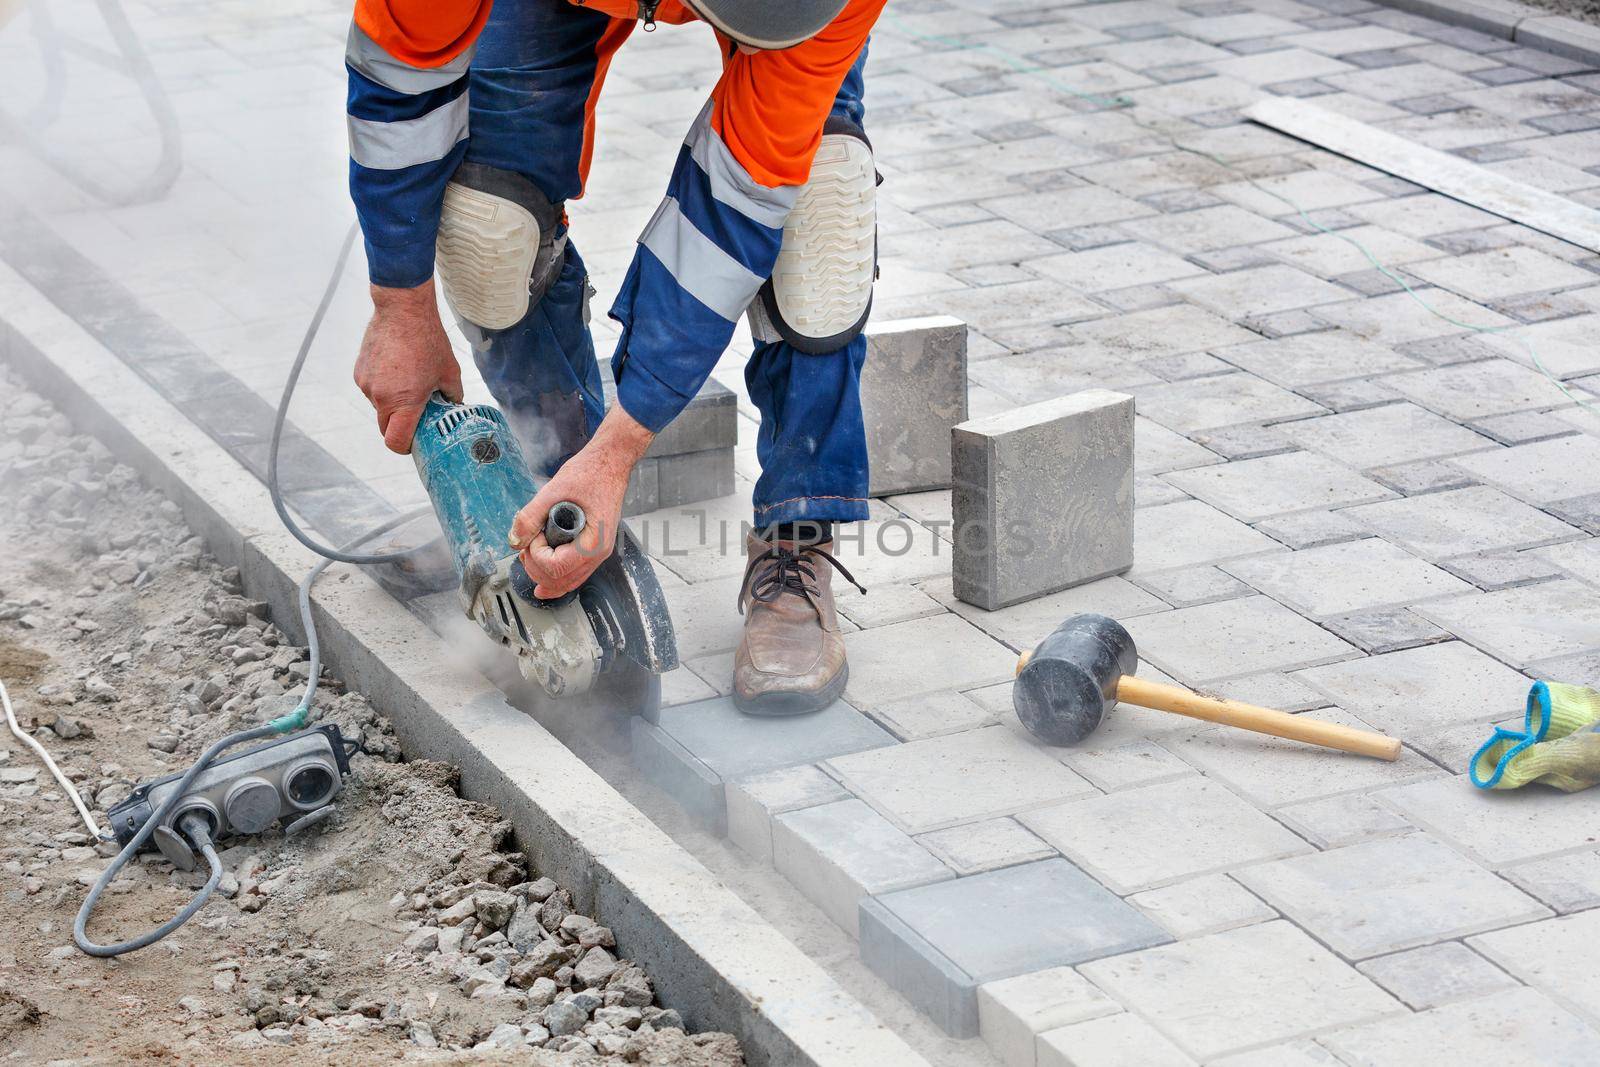 The bricklayer uses a grinder and diamond cutting discs to cut off the protruding part of the paving slabs for leveling on the sidewalk. by Sergii